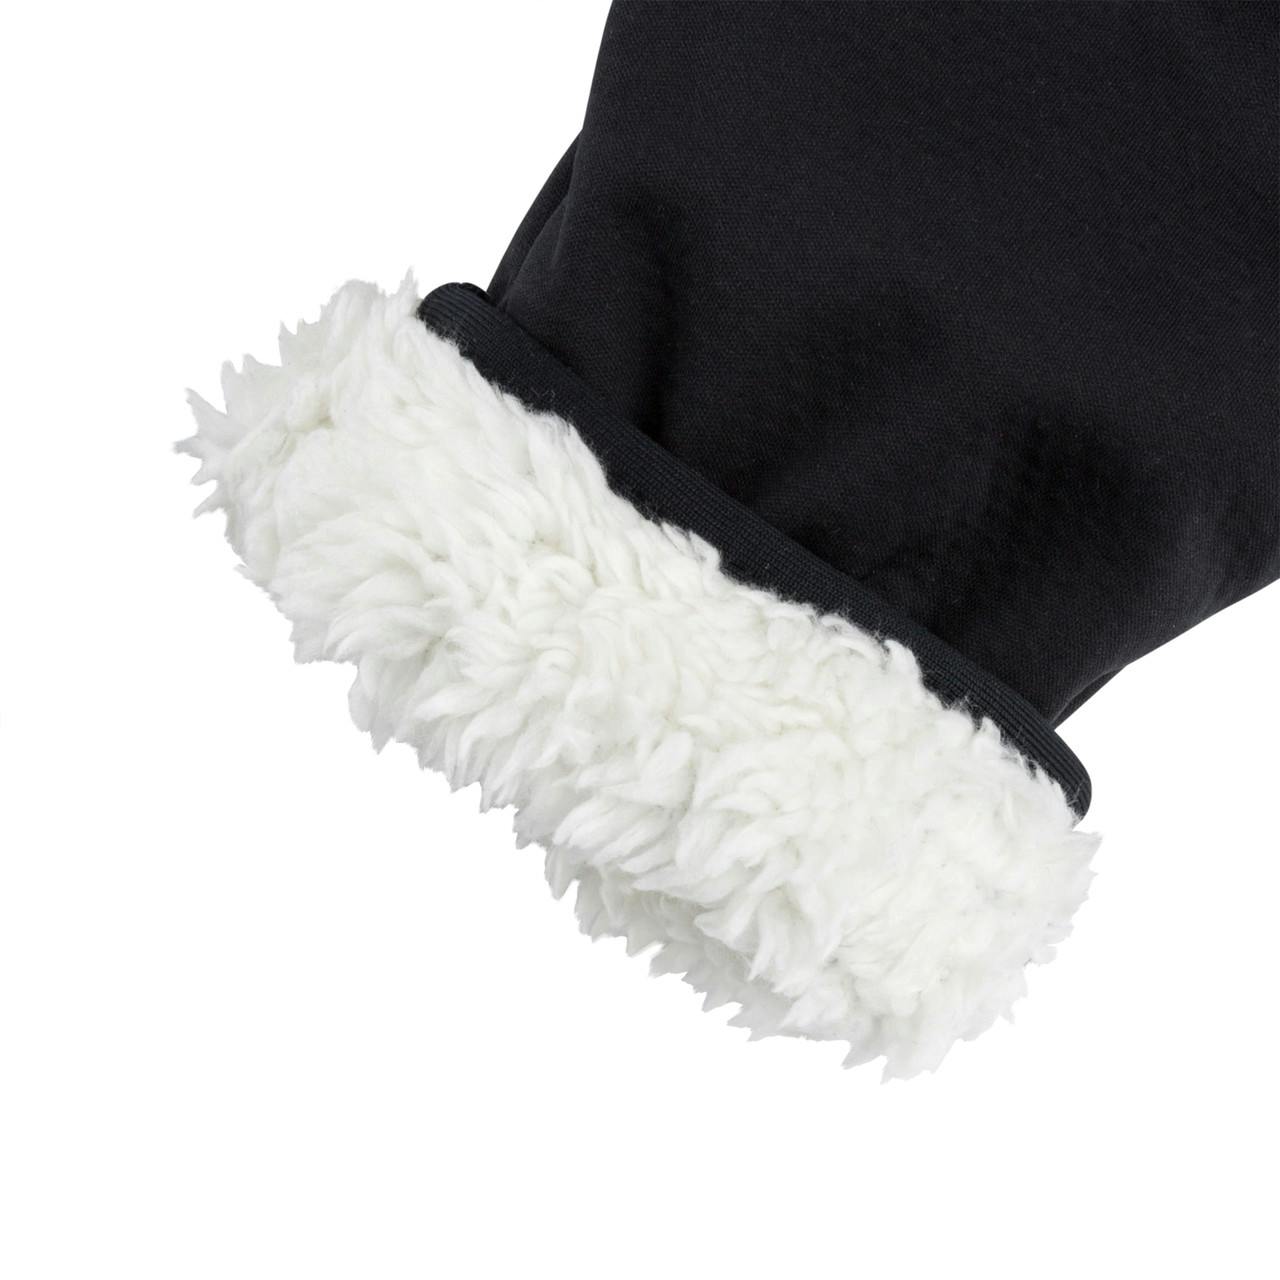 Soche Midweight Mitts Black